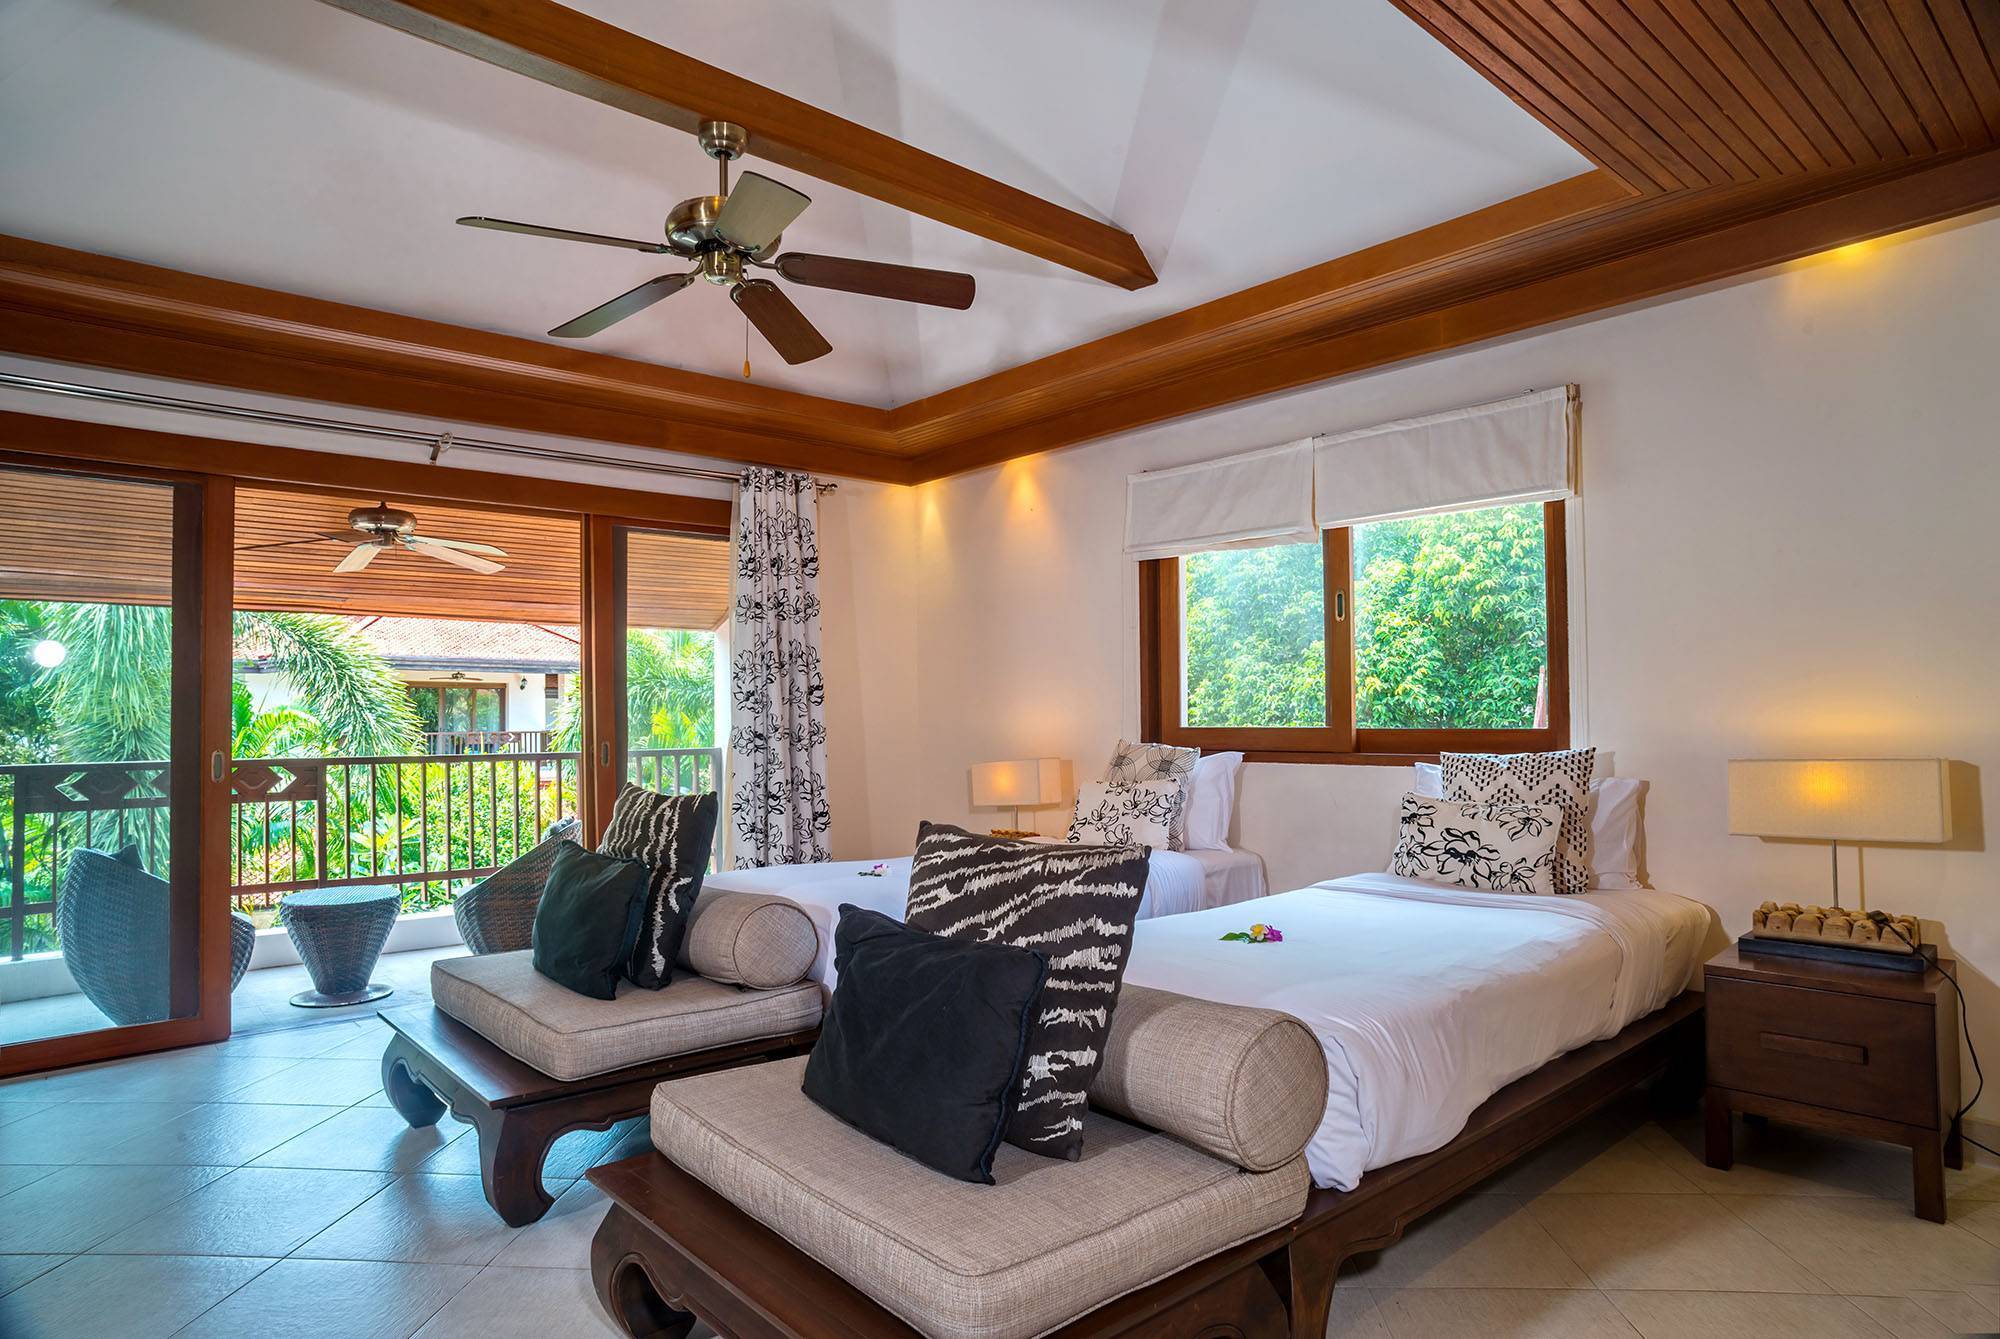 Tropical 4-bedroom beachside villa for sale in Hua Thanon: Tropical 4-bedroom beachside villa for sale in Hua Thanon